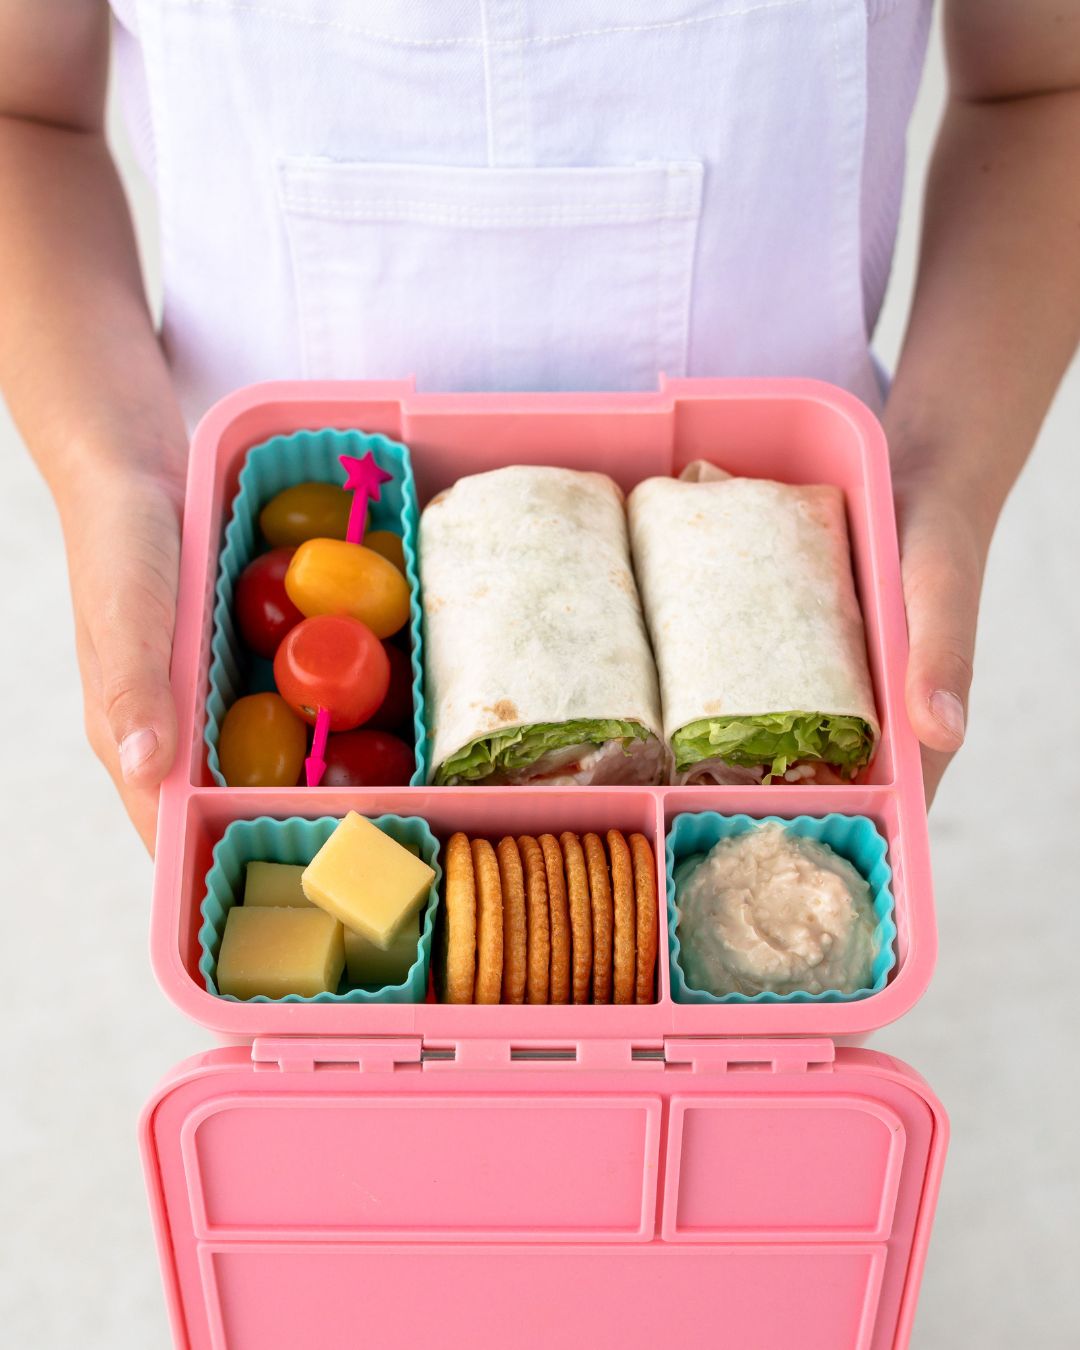 Little Lunch Box Co Bento Cups Mixed - Strawberry